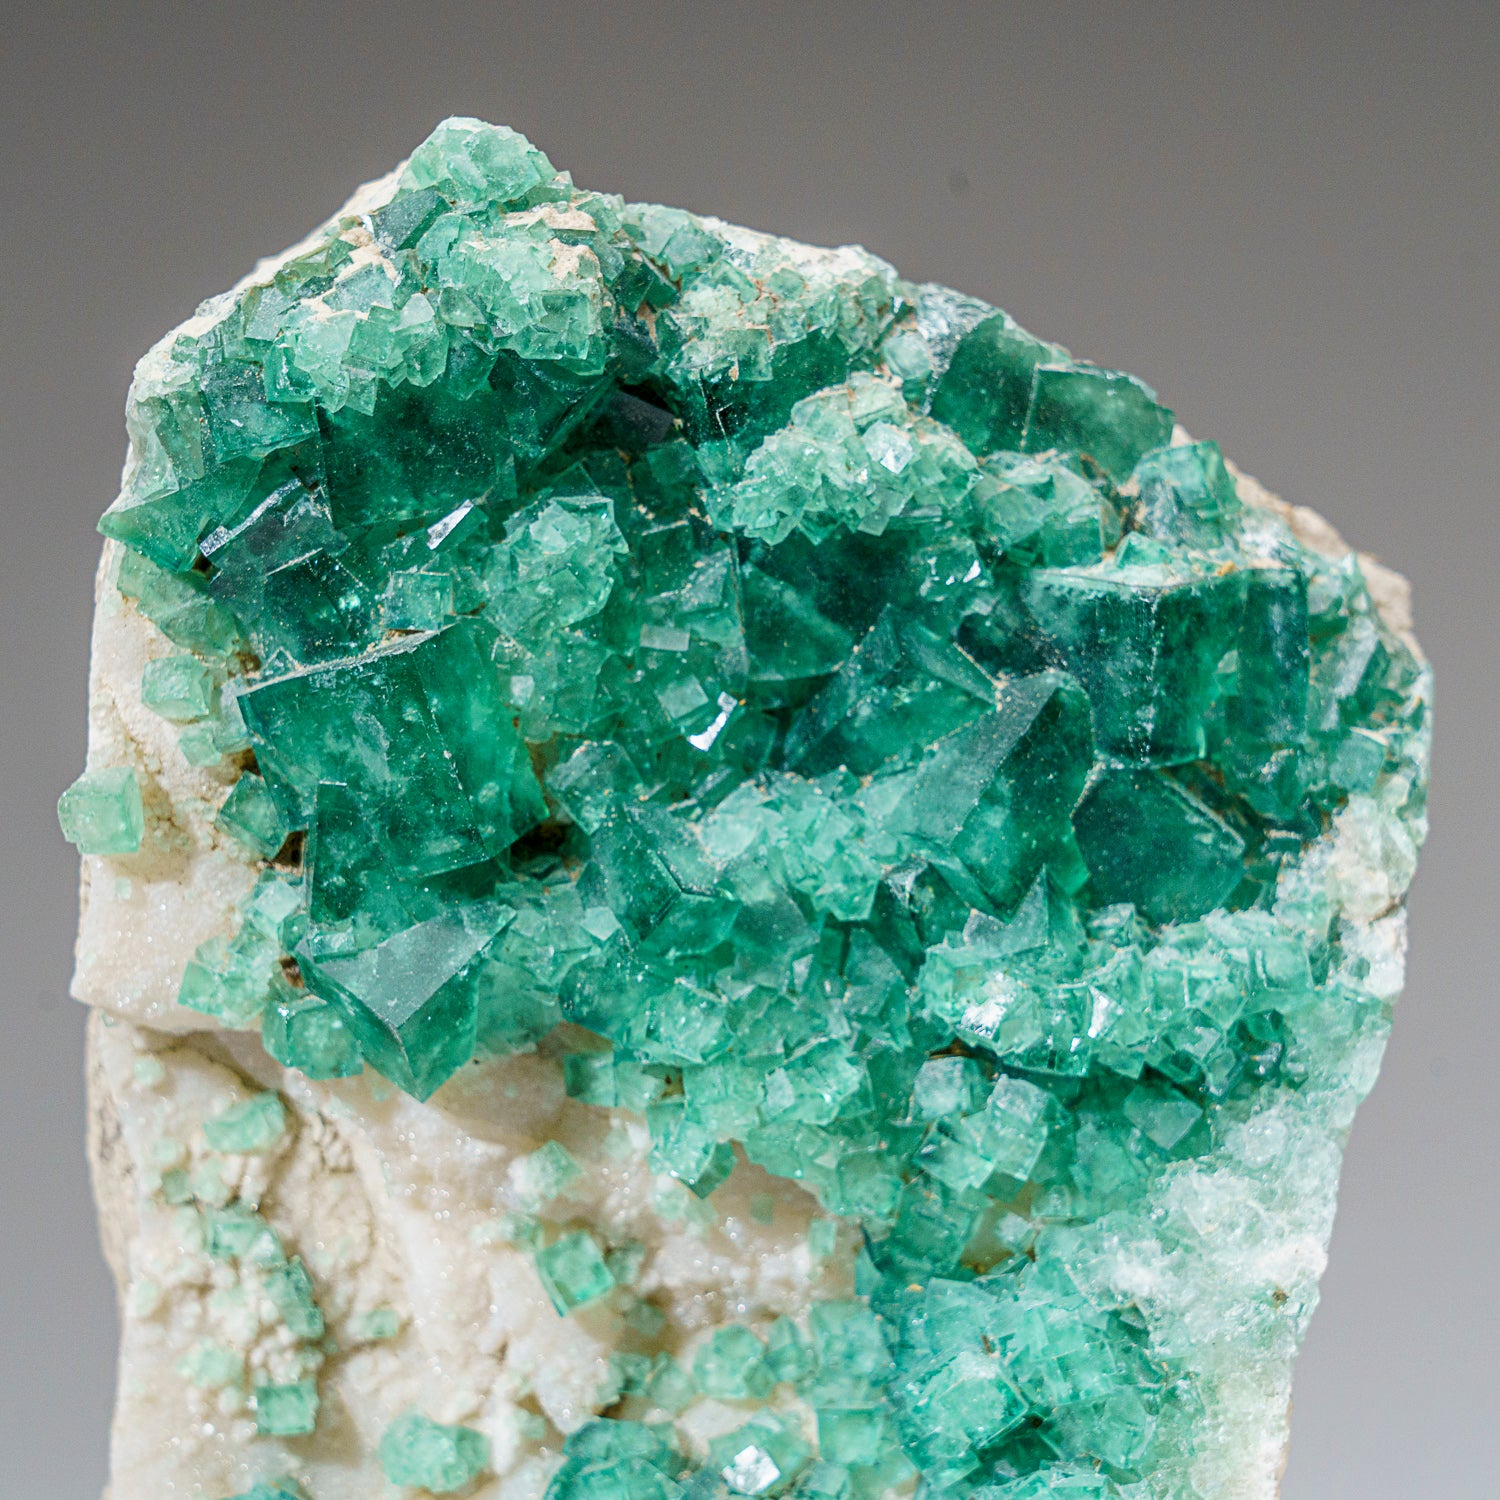 Genuine Green Fluorite from Namibia (5 lbs)